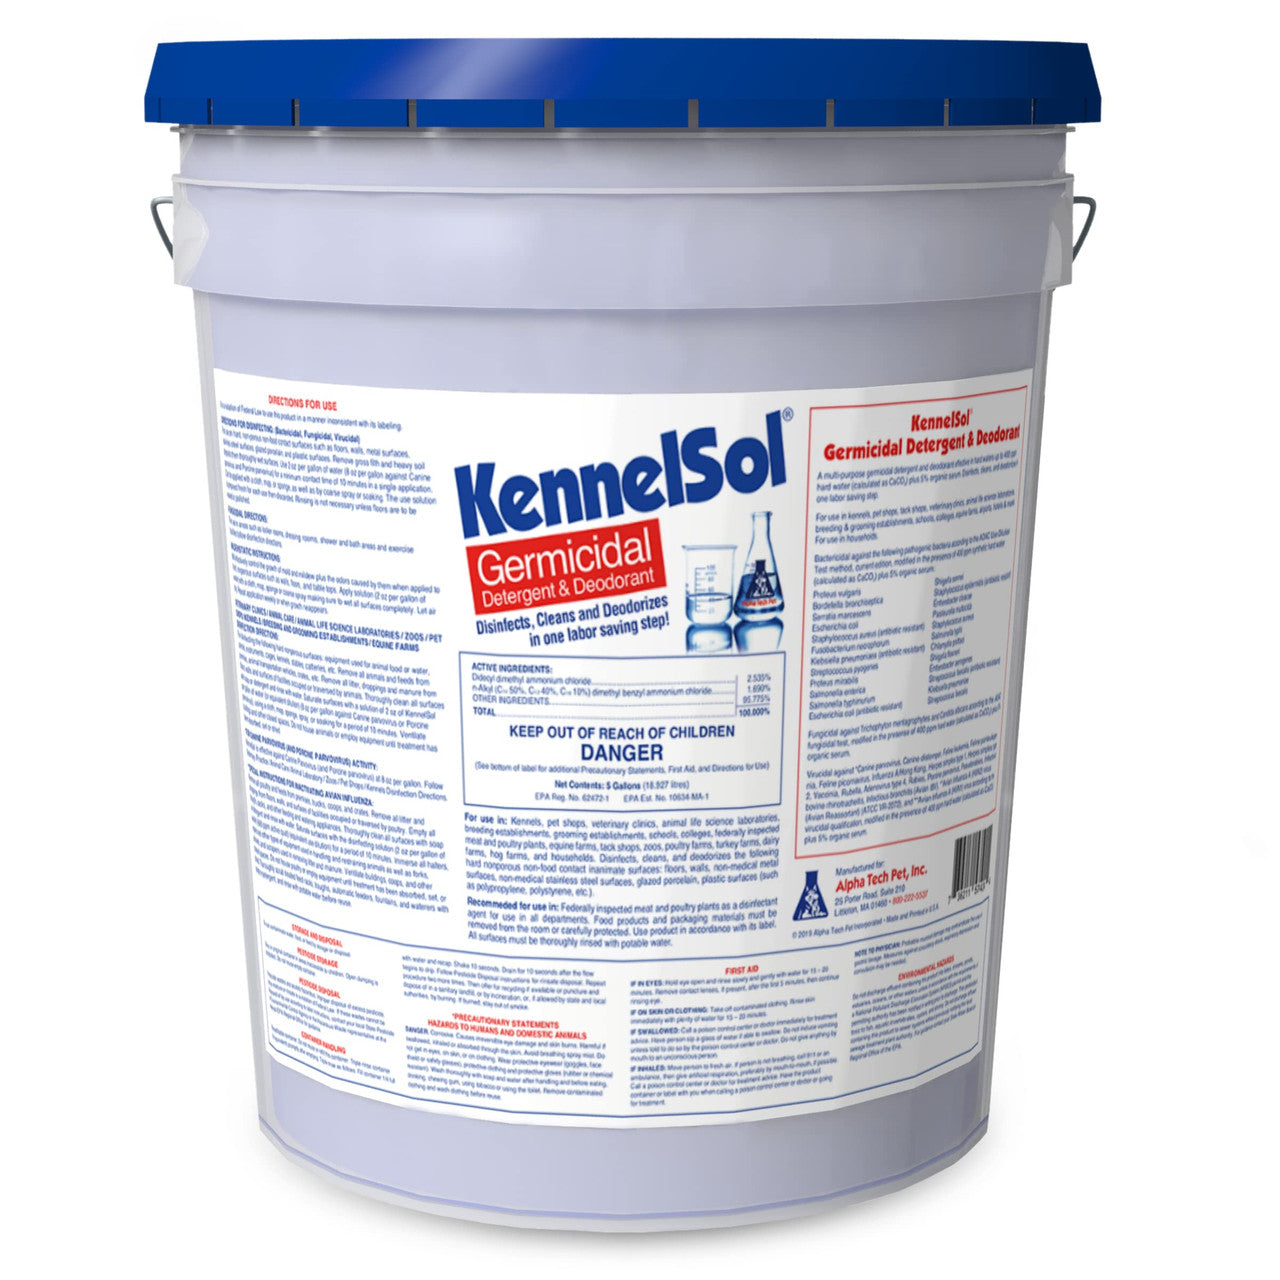 Kennelsol Germicidal Detergent and Deodorant - 5 Gallon